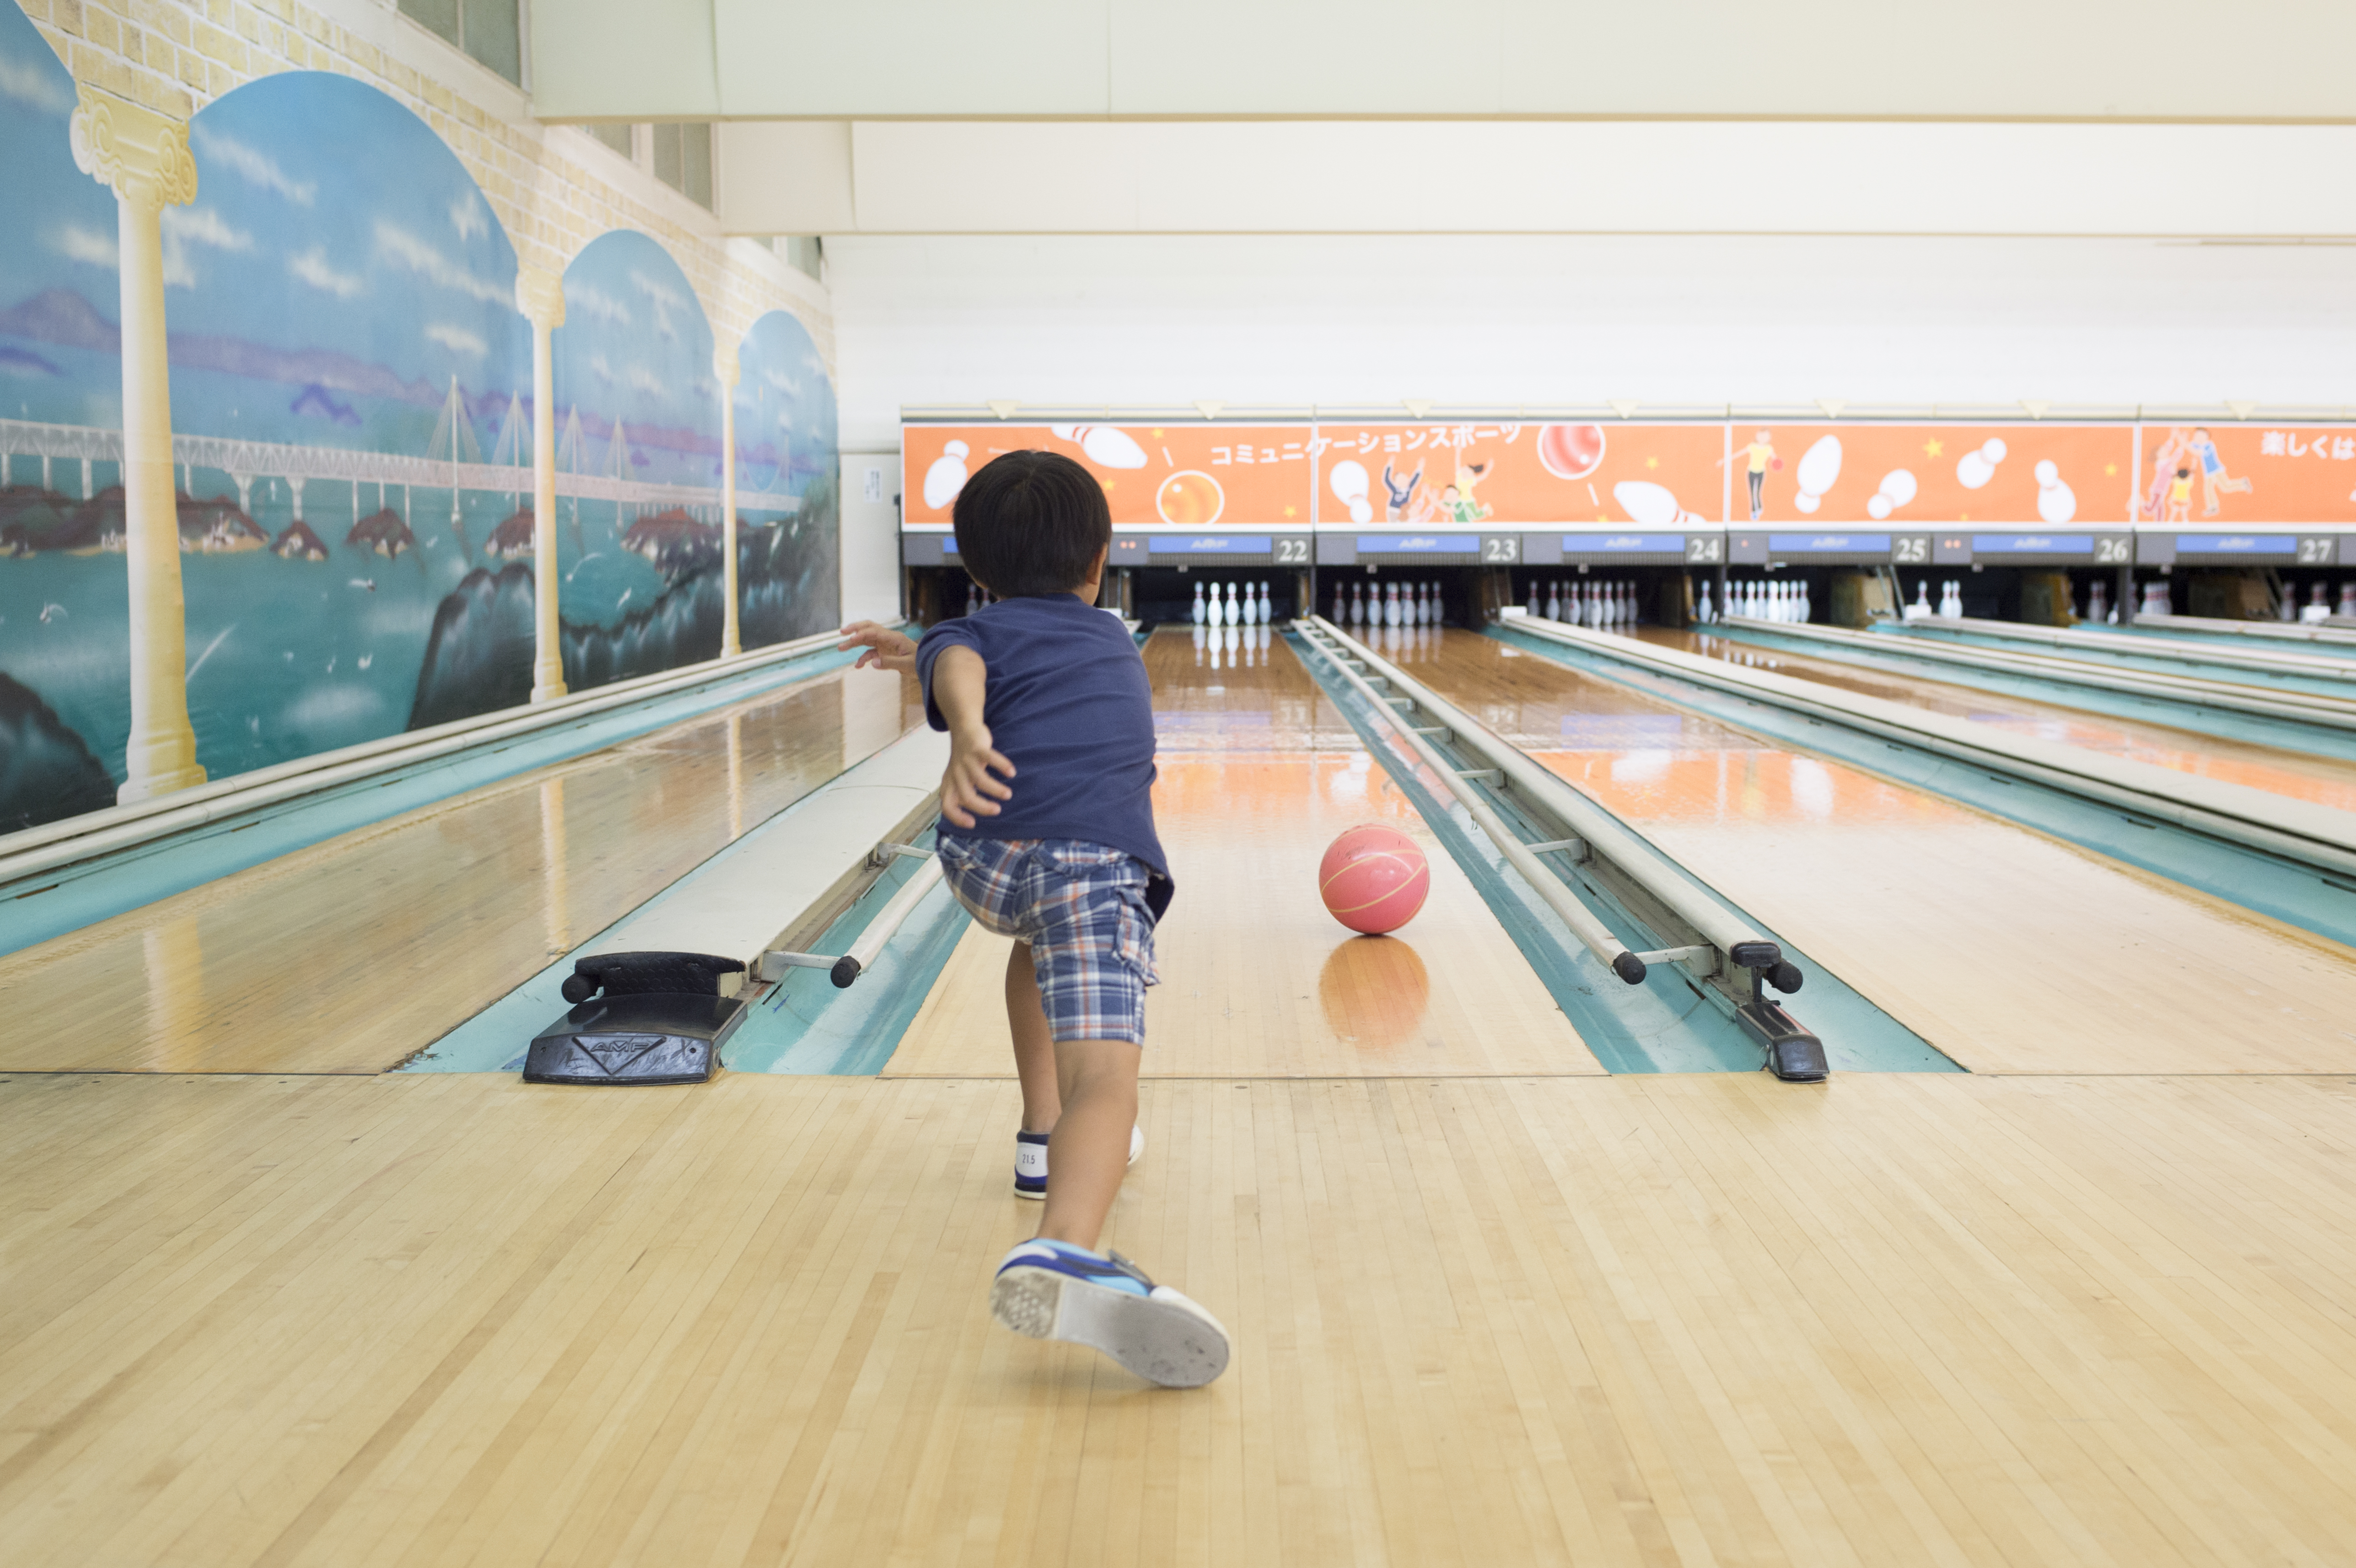 National Bowling Day 2019 Where to Bowl Free August 10 Money